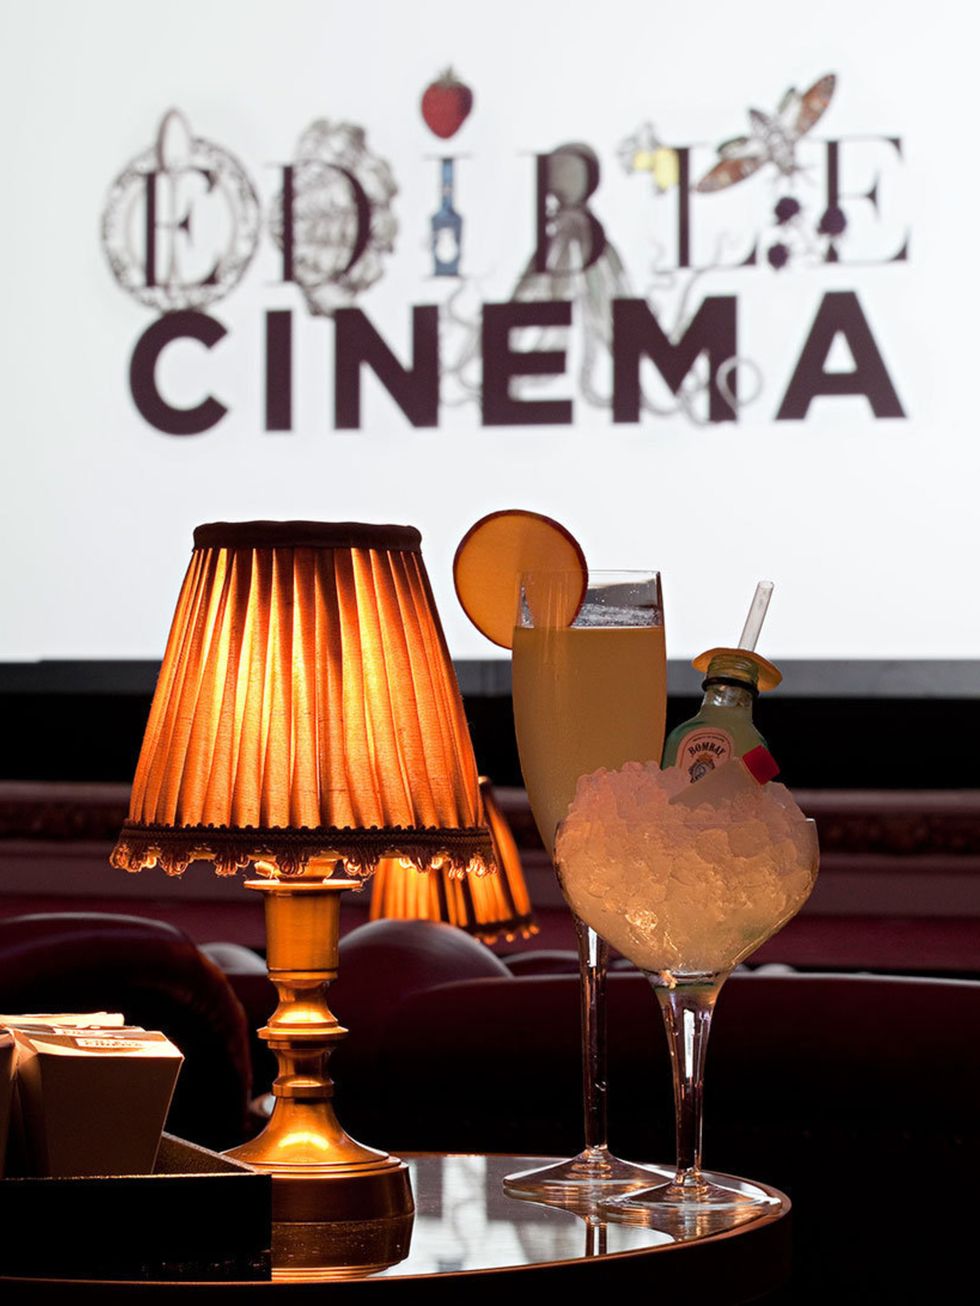 &lt;p&gt;&lt;strong&gt;FILM: Edible Cinema Presents Romeo+Juliet at BAFTA&lt;/strong&gt;&lt;/p&gt;&lt;p&gt;Surely it&rsquo;s impossible to make a Baz Luhrmann any more delectable? Well, this weekend Soho House will be proving to Luhrmann lovers that impos